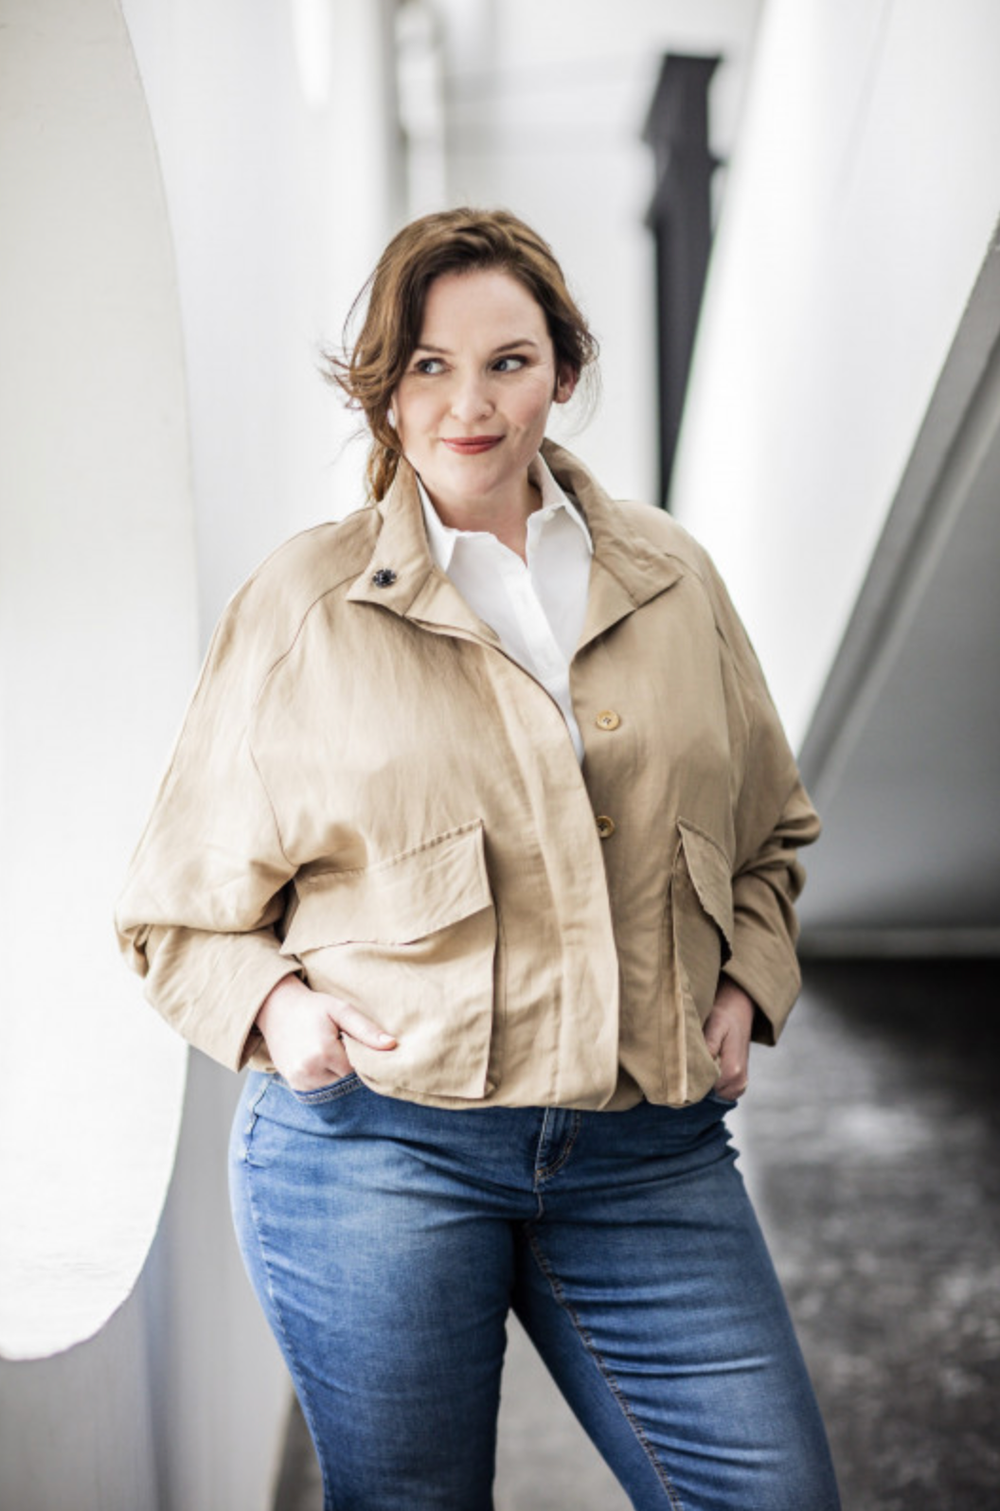 Woman wearing the Avril Jacket sewing pattern from Fibre Mood on The Fold Line. A Jacket pattern made in cotton twill, linen, crepe or jacquard fabrics, featuring a cropped length, stand collar, hidden button placket and gusseted patch pockets with button